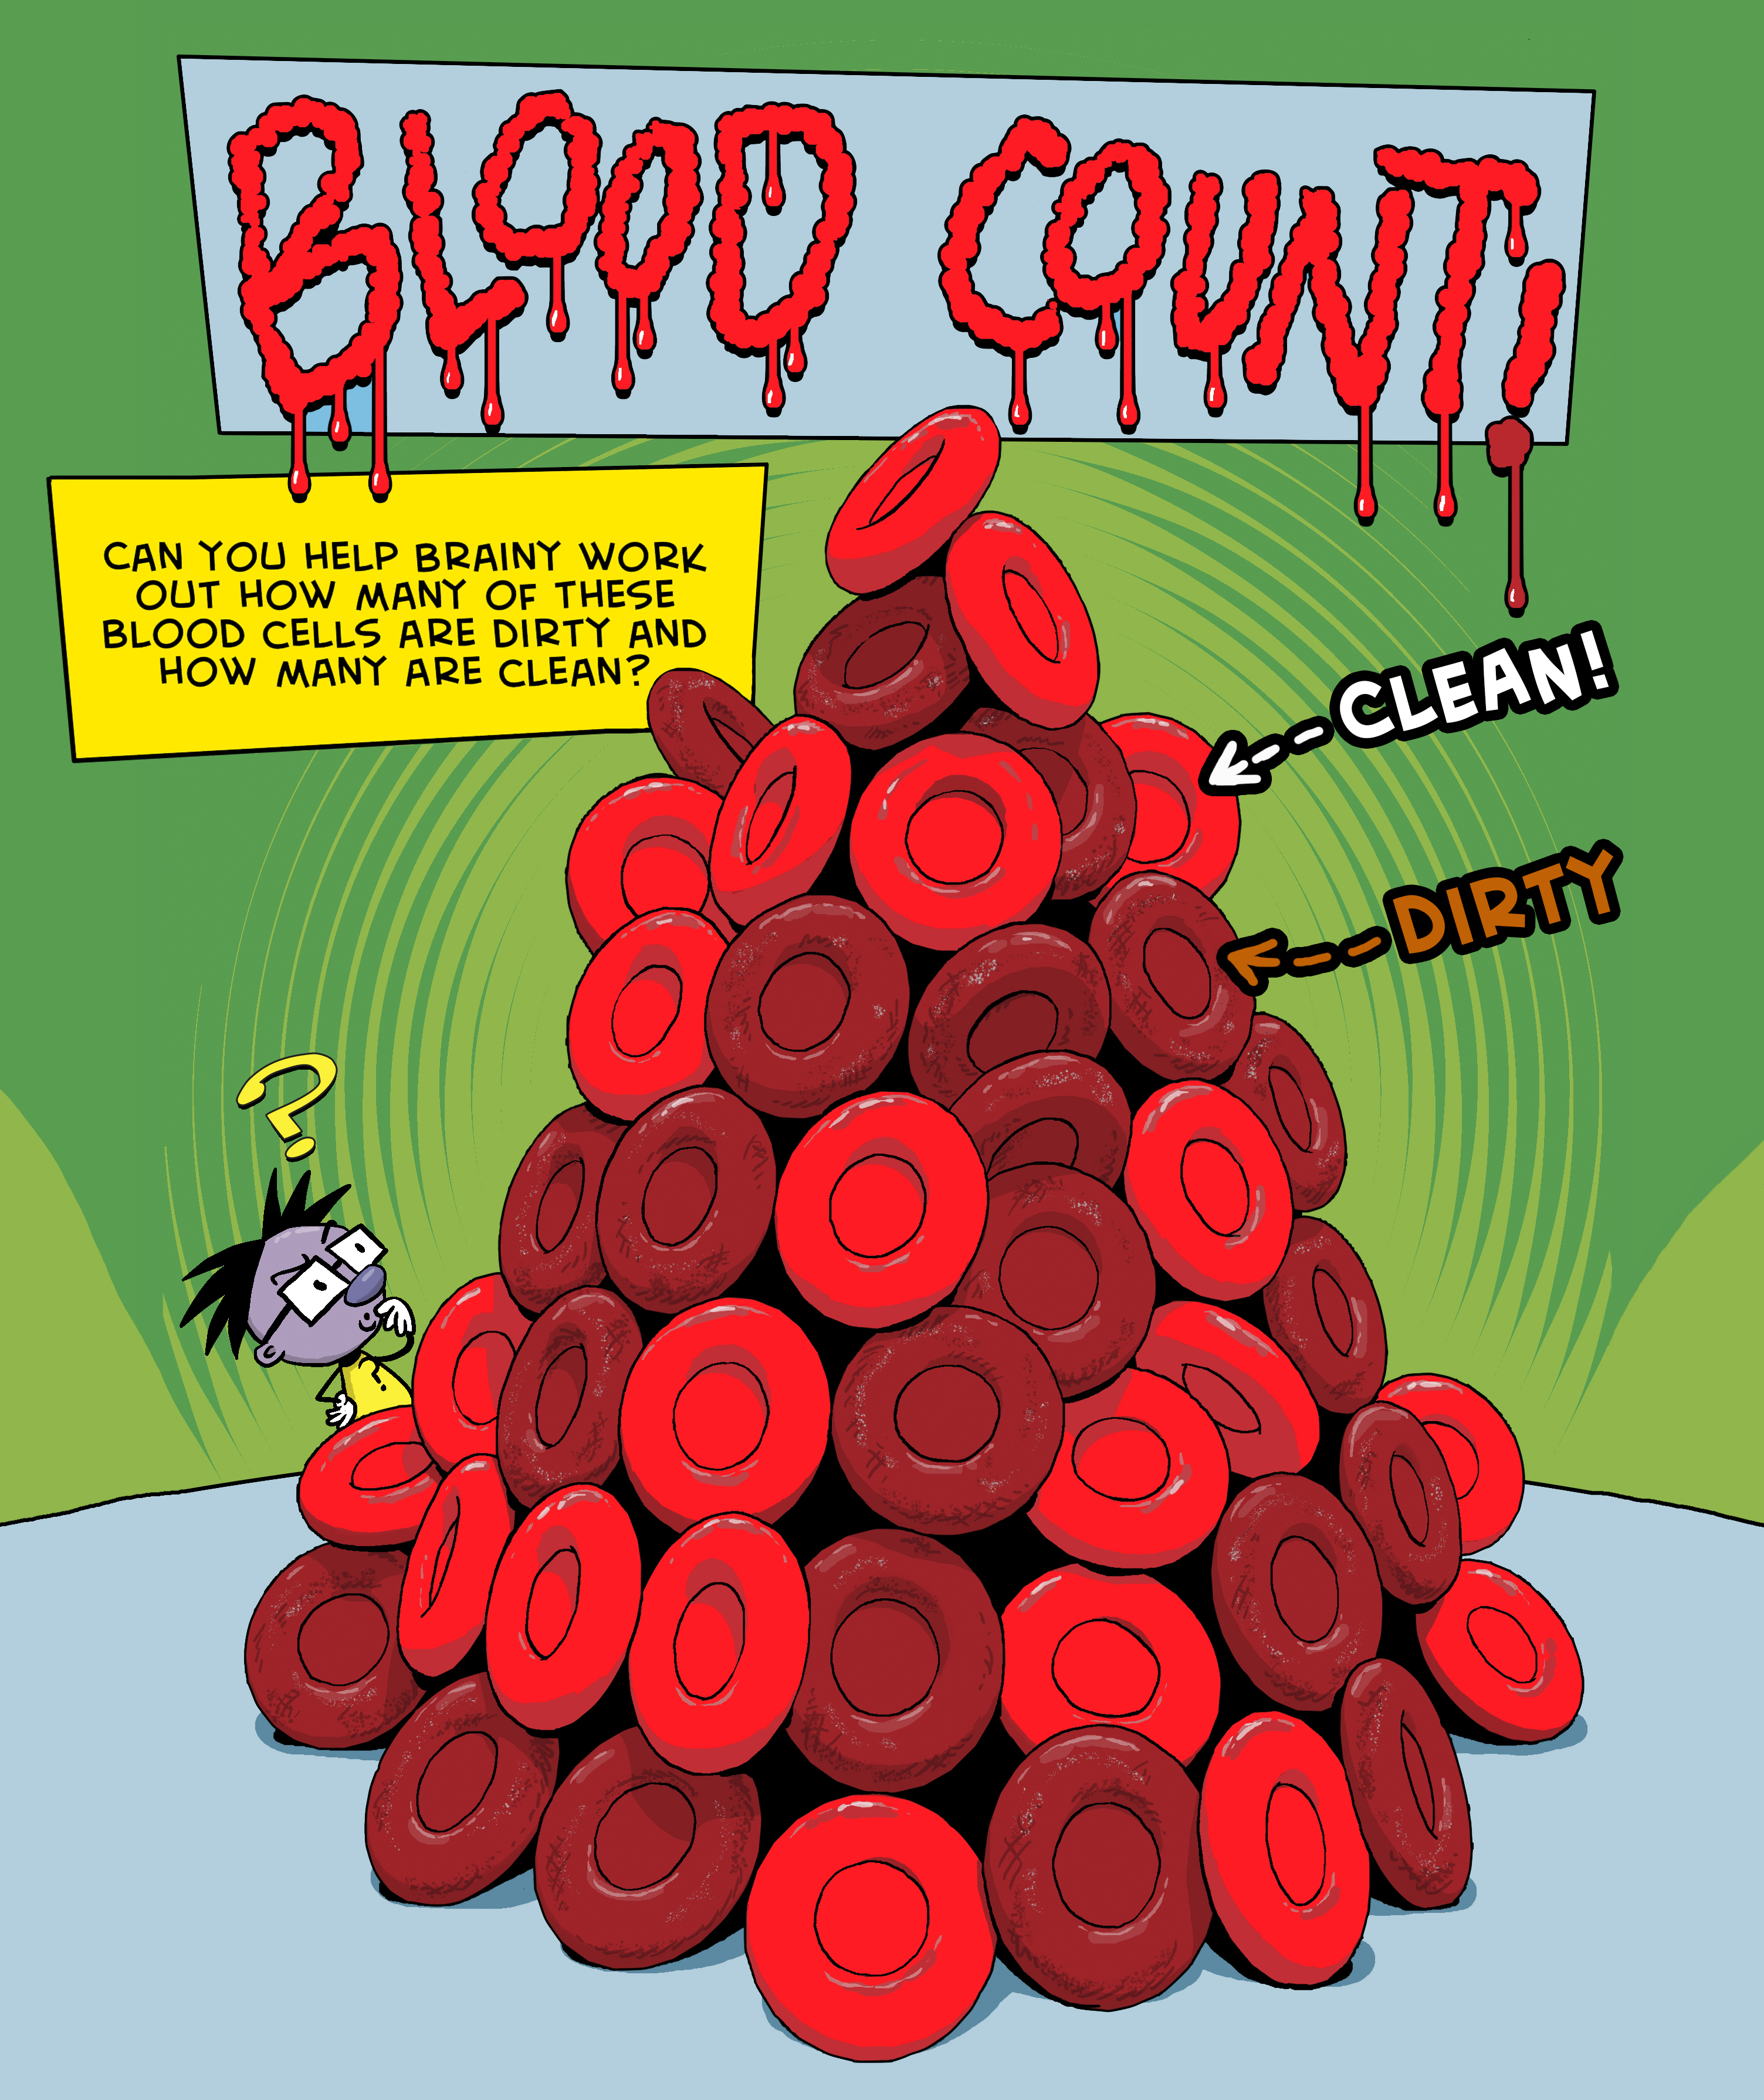 Help Brainy count the blood cells